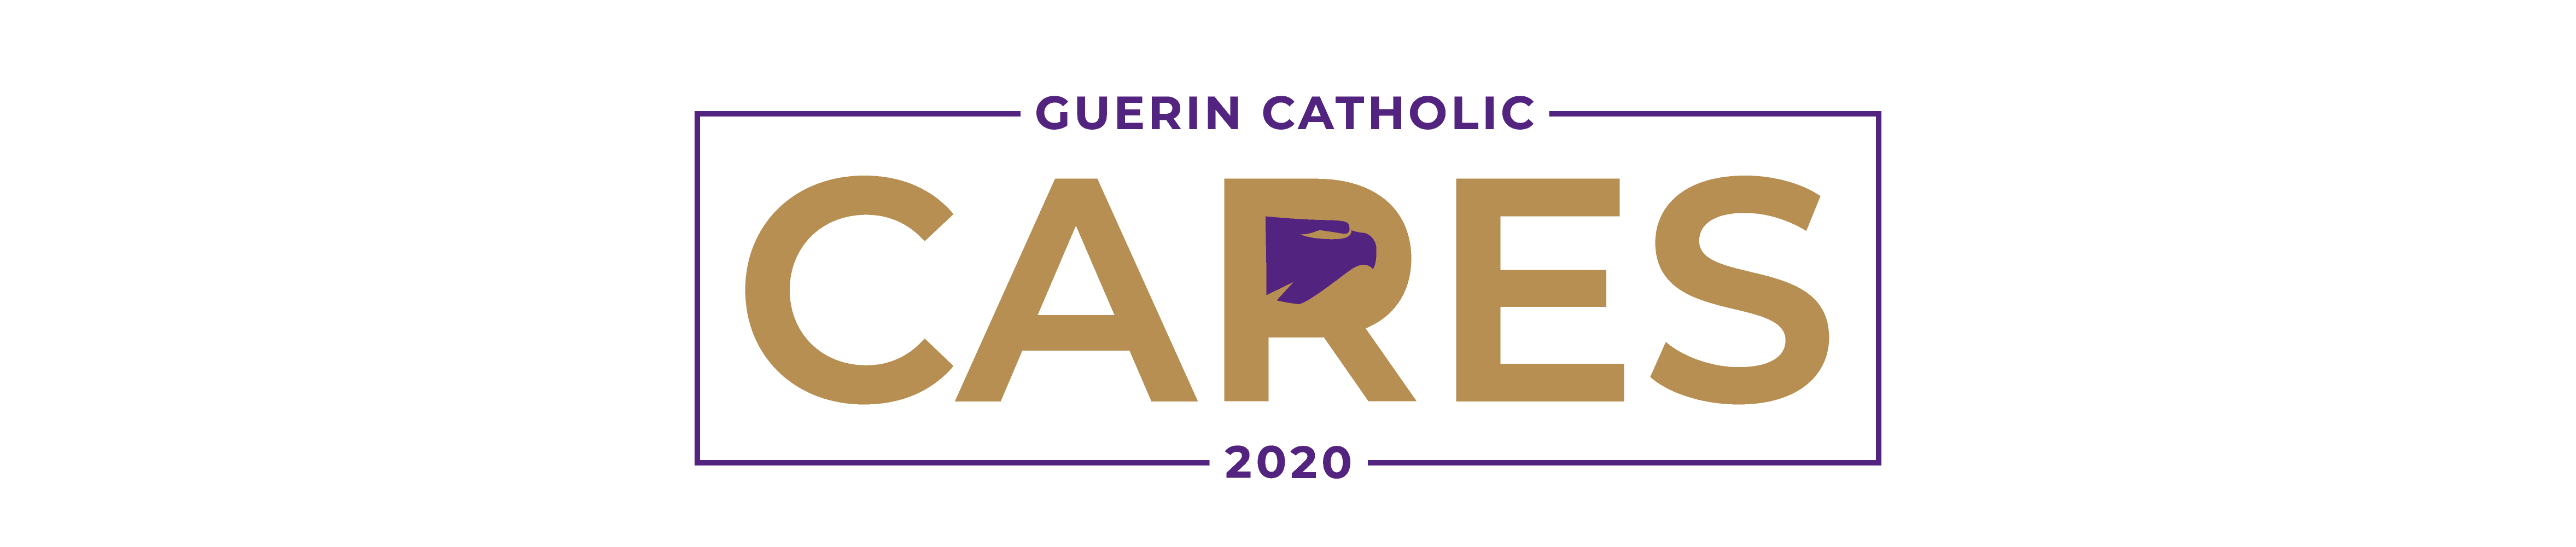 Guerin Catholic Cares – Support our Community